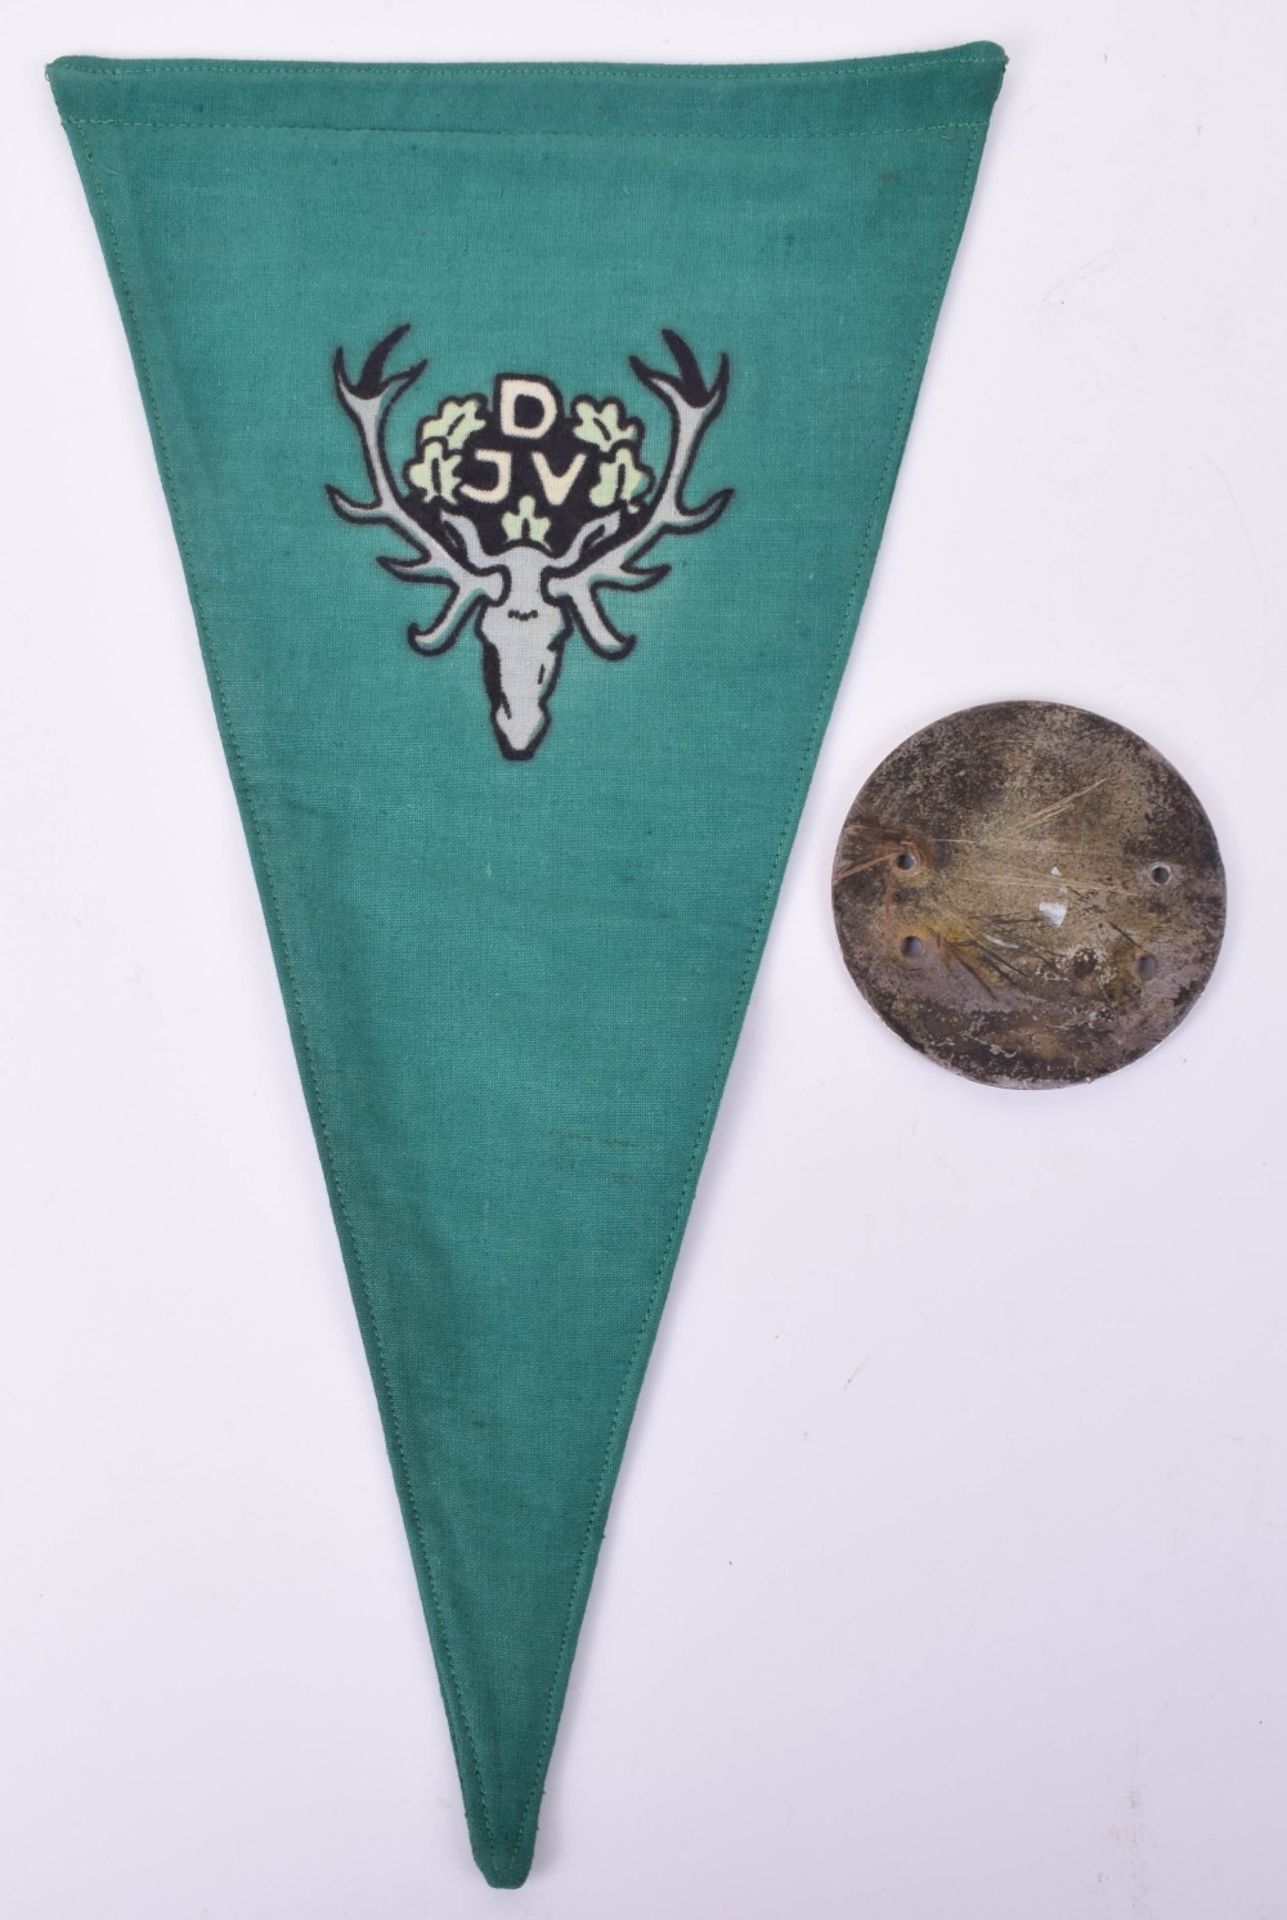 German Hunting Association Car Badge and Pennant - Image 3 of 3